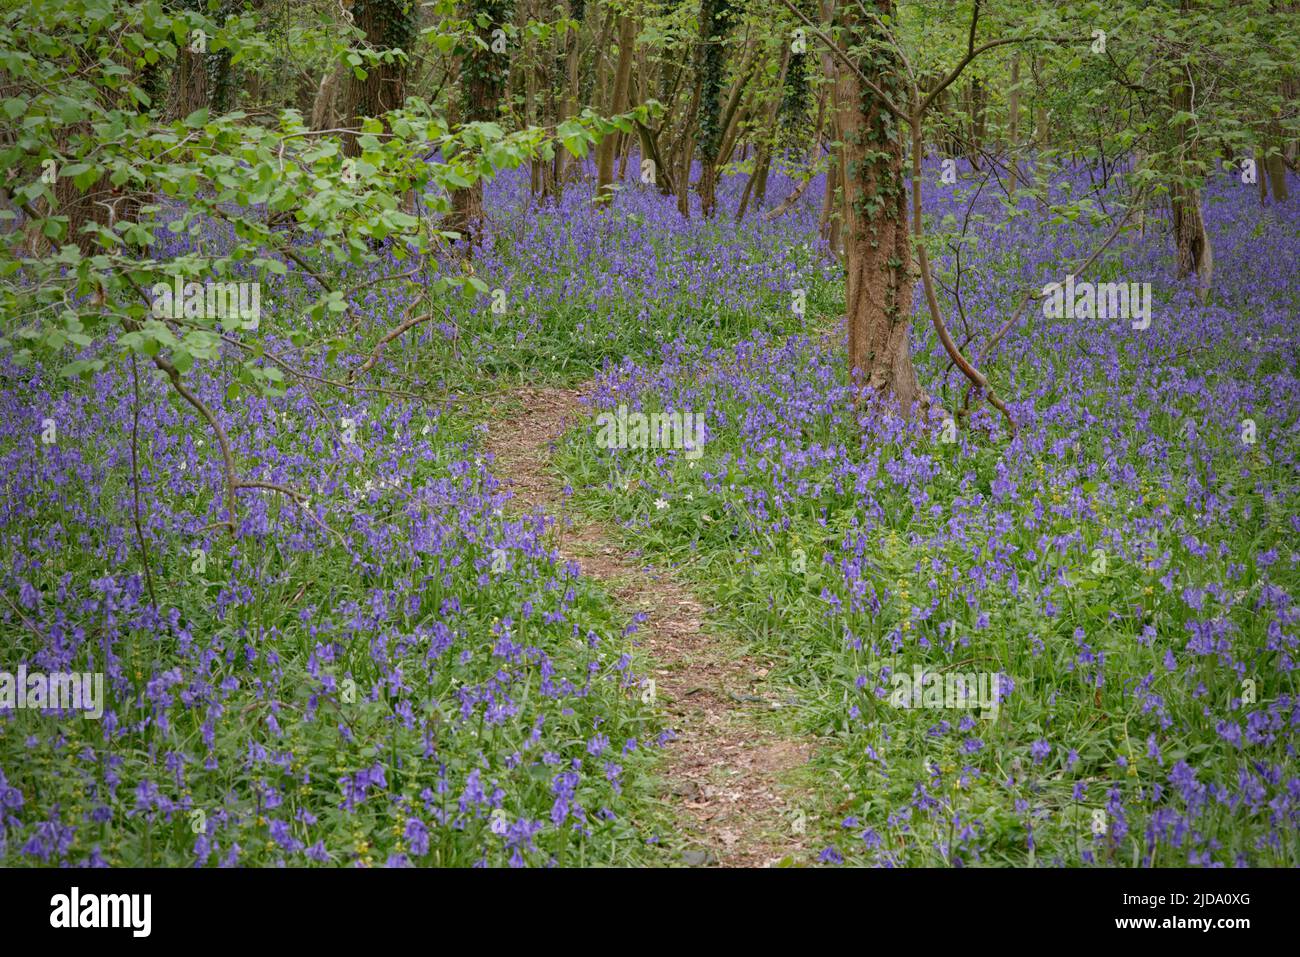 Bluebells along a Path in Ancient British Woodland Stockfoto